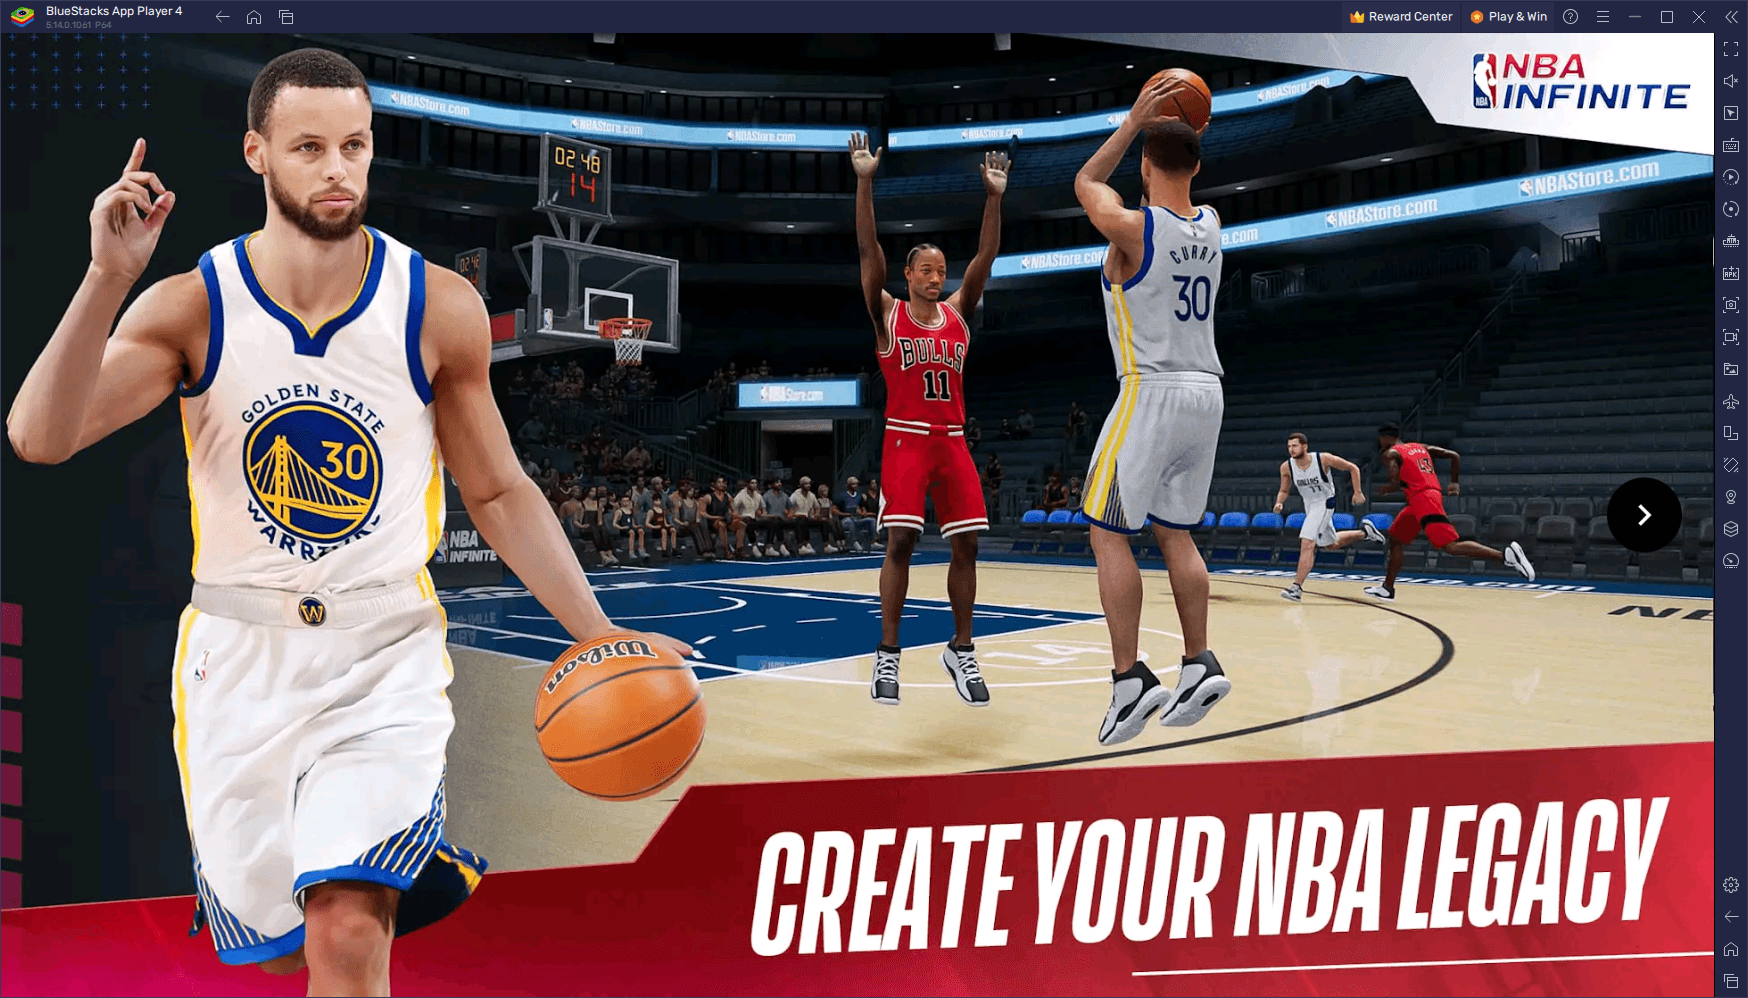 NBA Infinite on PC – Pre-Registrations Open for This Upcoming Basketball Mobile Game